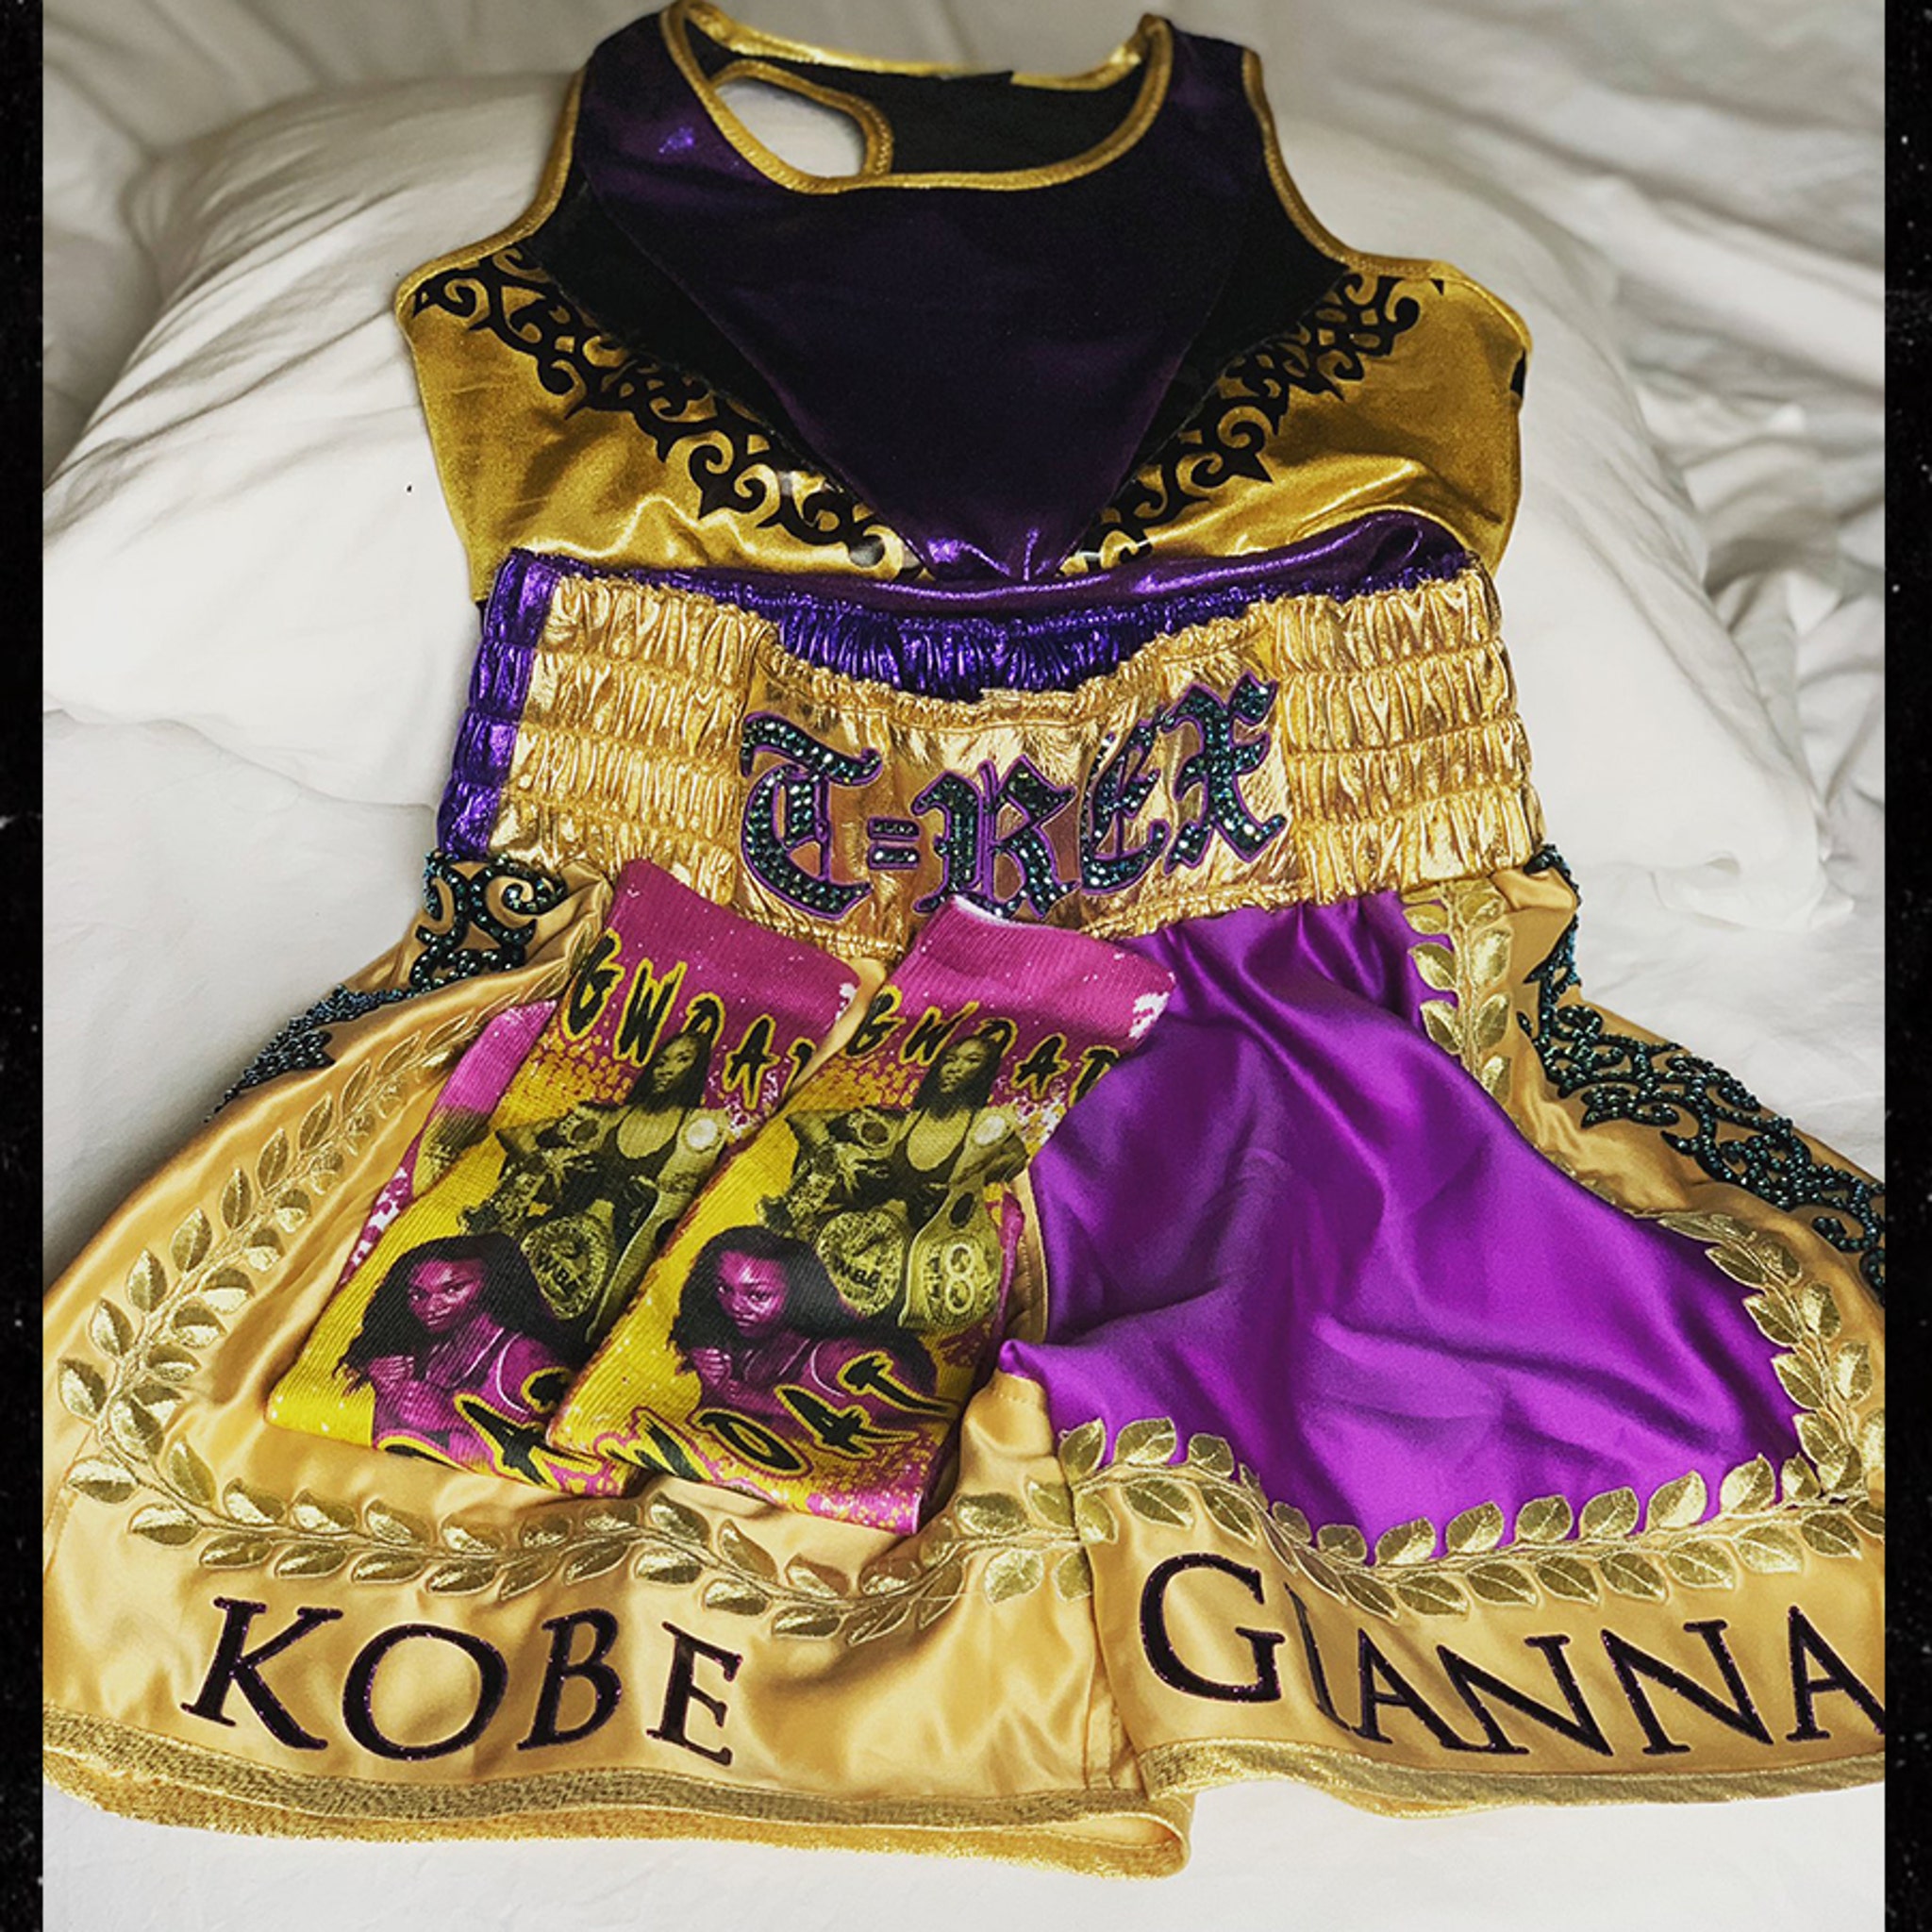 Claressa Shields Pays Tribute to Kobe Bryant With Fight Outfit